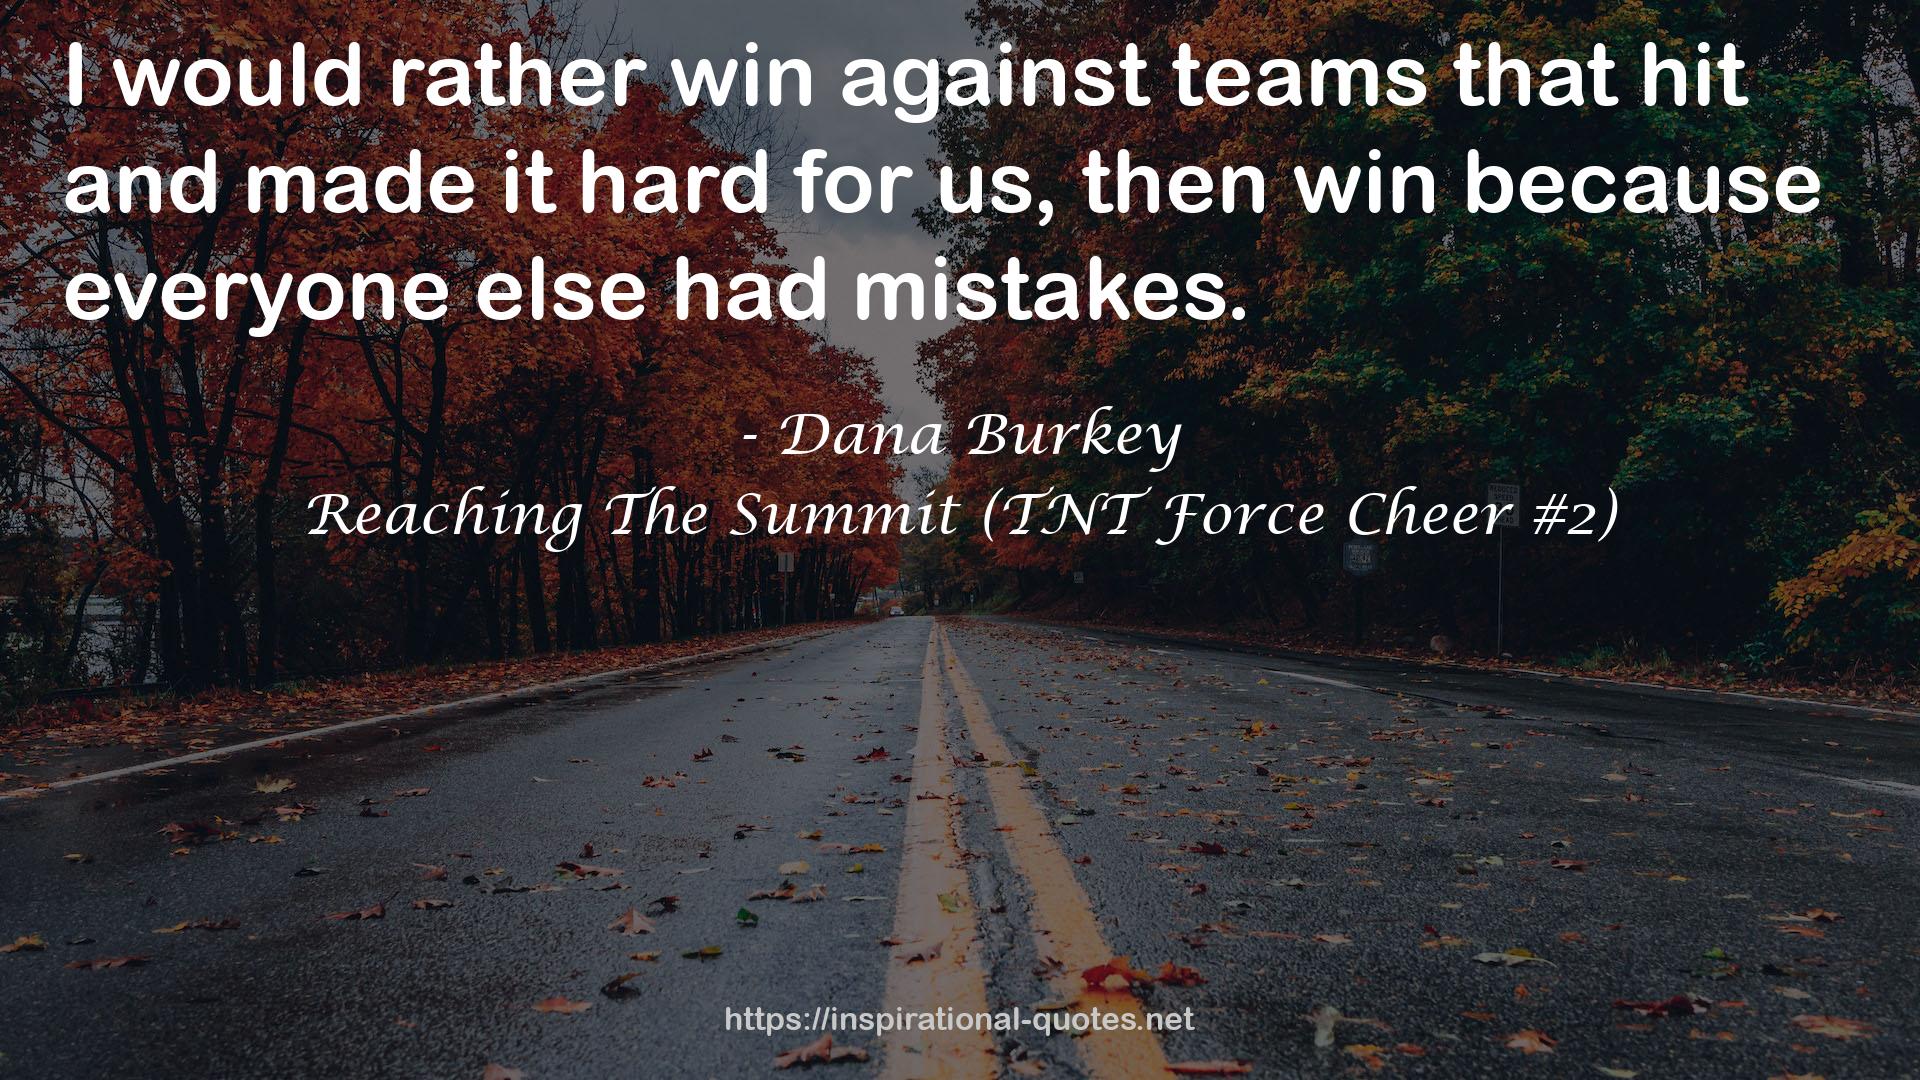 Reaching The Summit (TNT Force Cheer #2) QUOTES